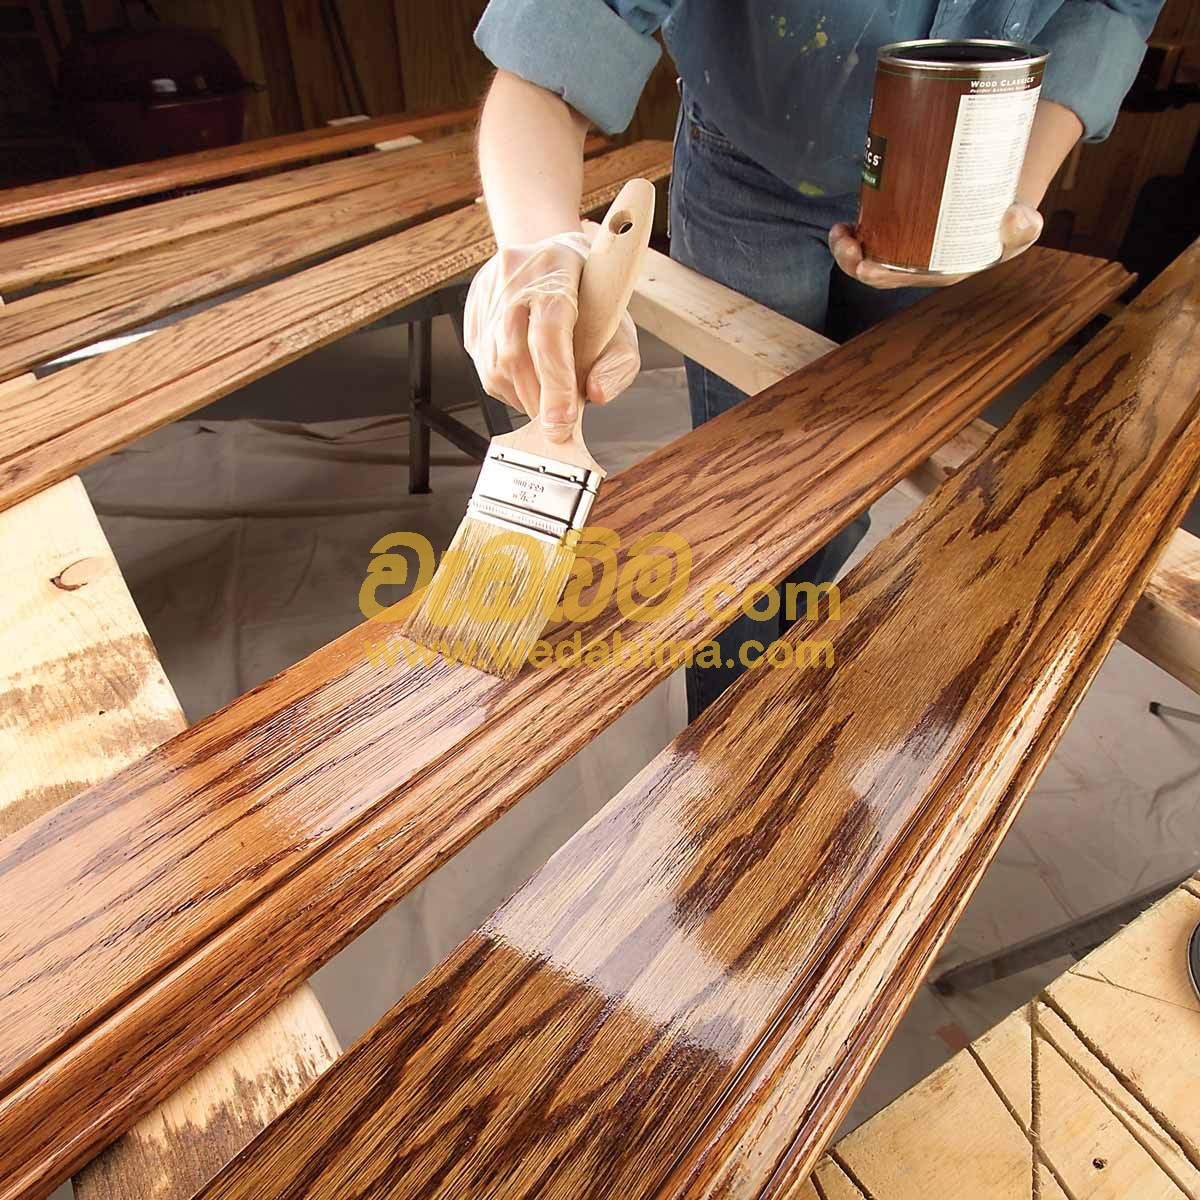 Cover image for Wood finishing work